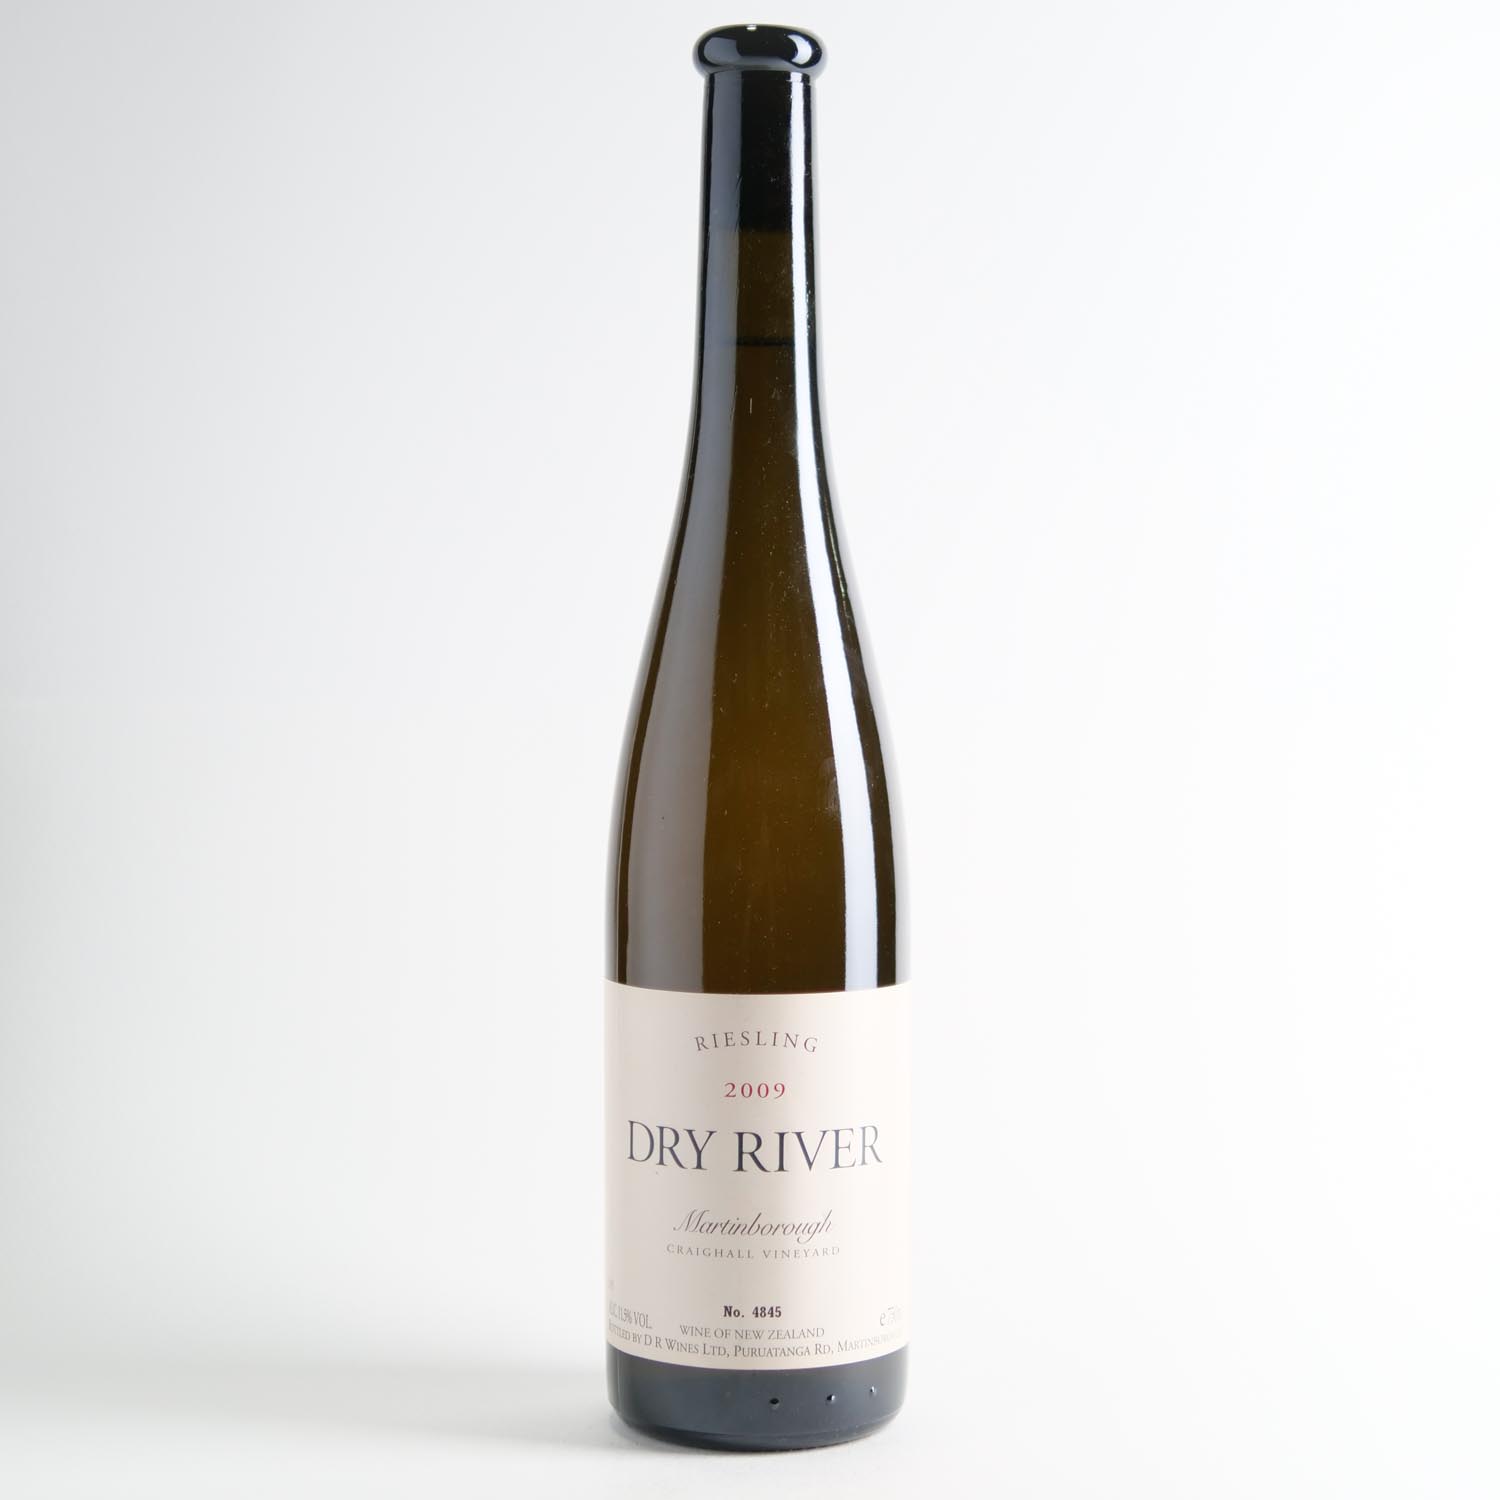 Dry River Craighall Riesling 2009